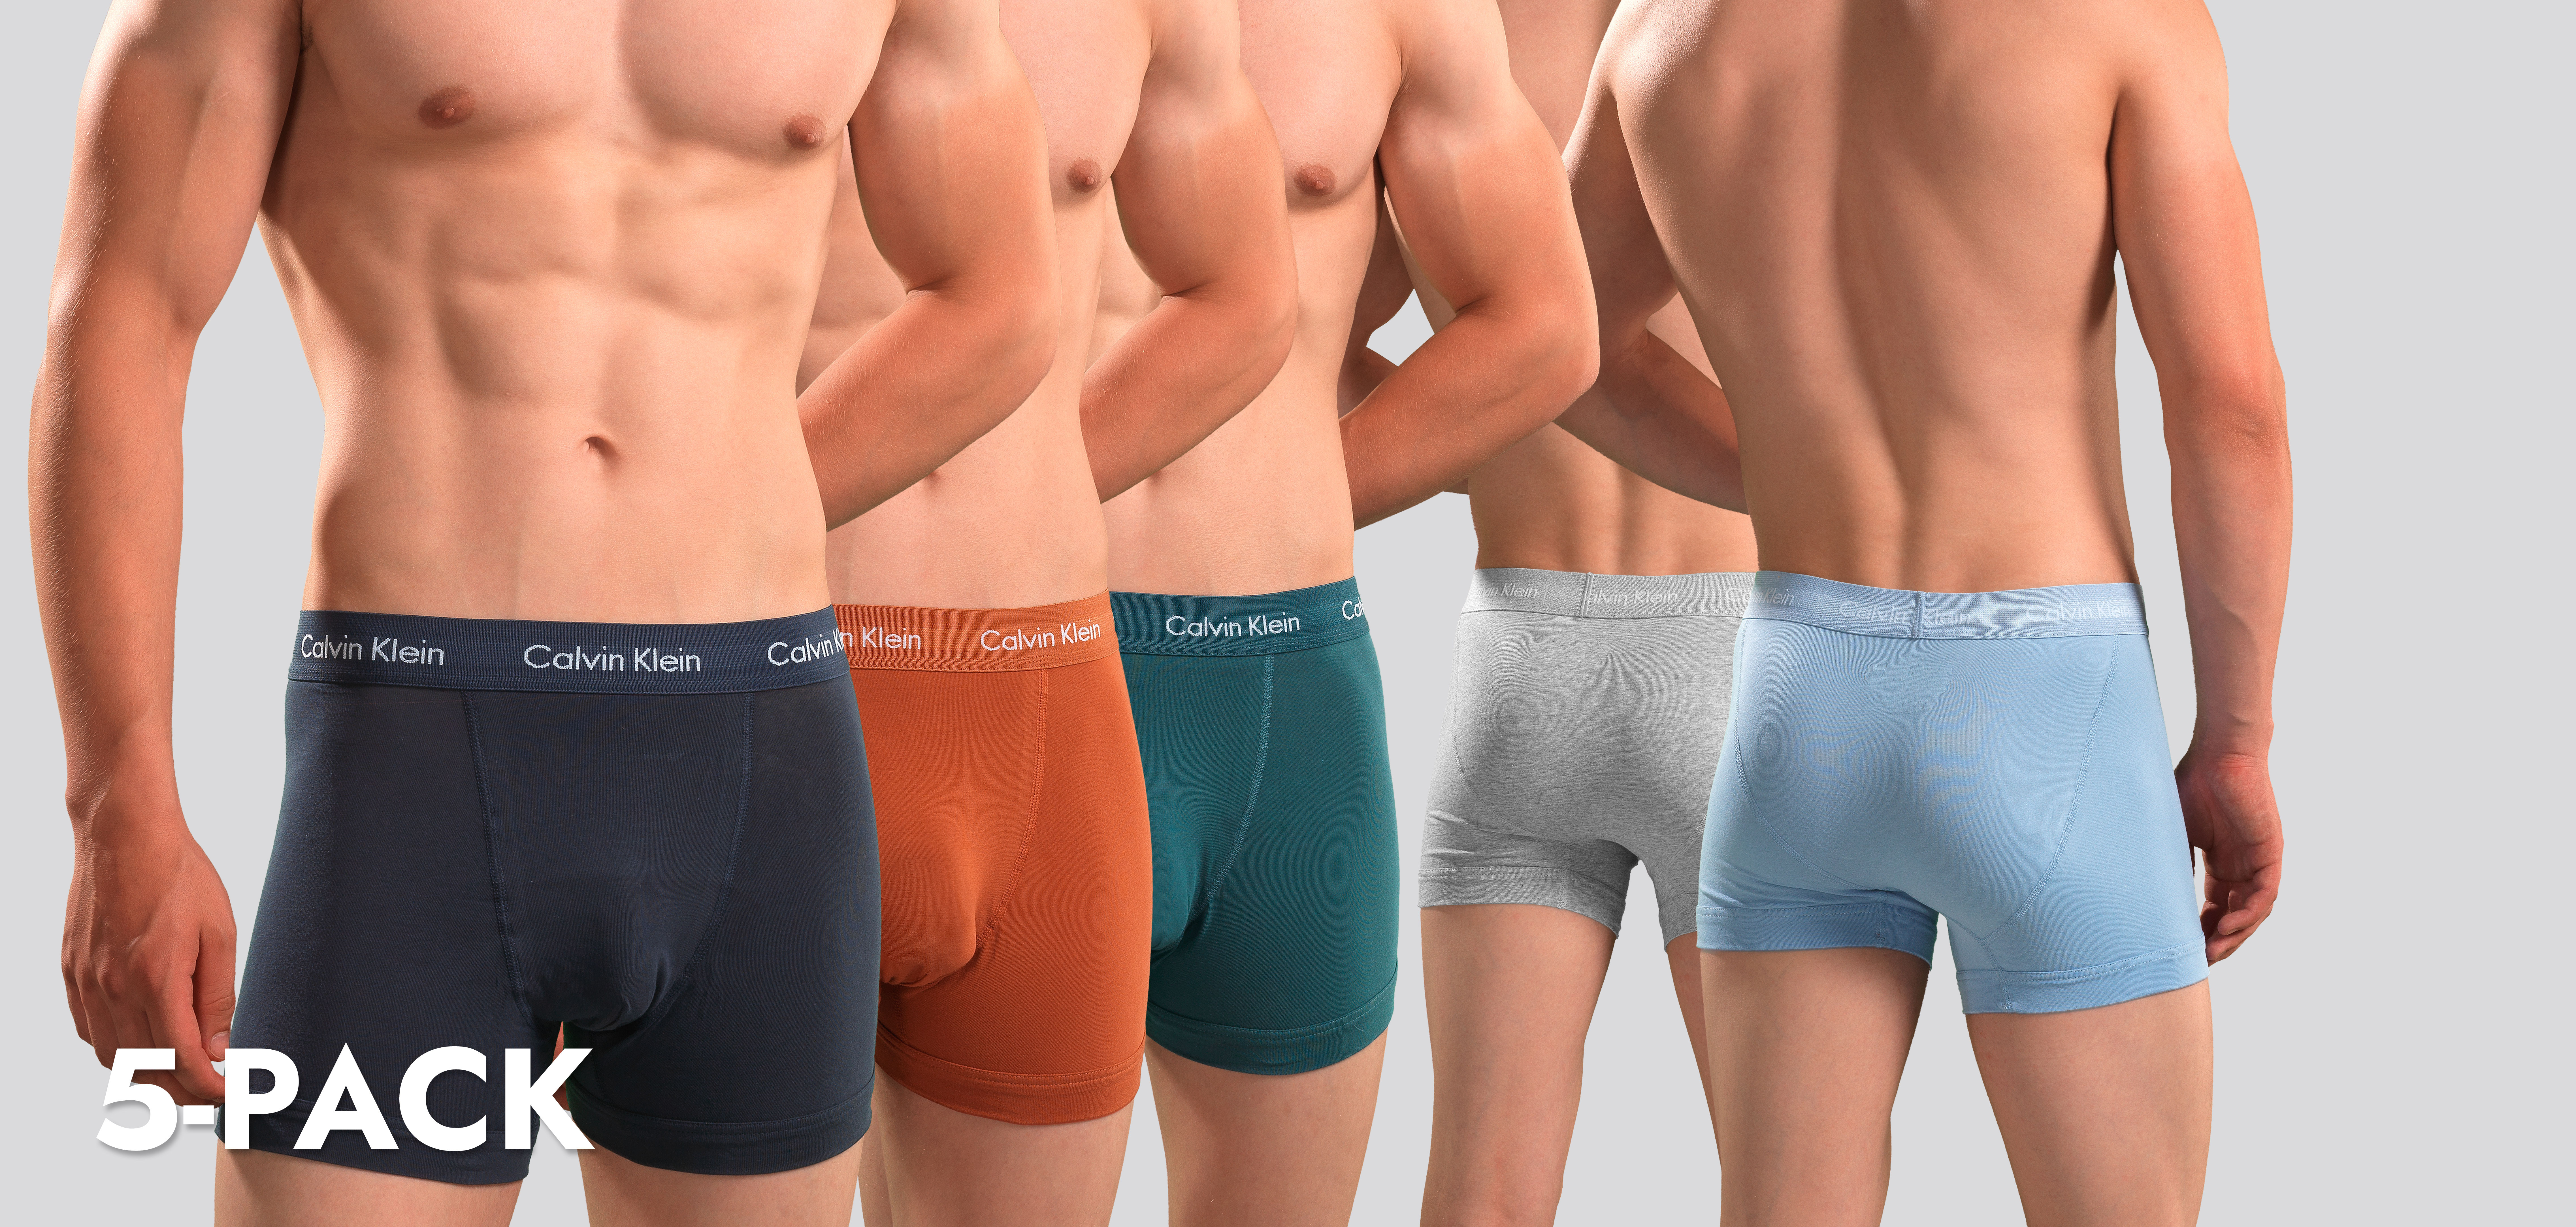 Calvin Klein Trunk 5-Pack NB2877A Classic Fit, color Nee